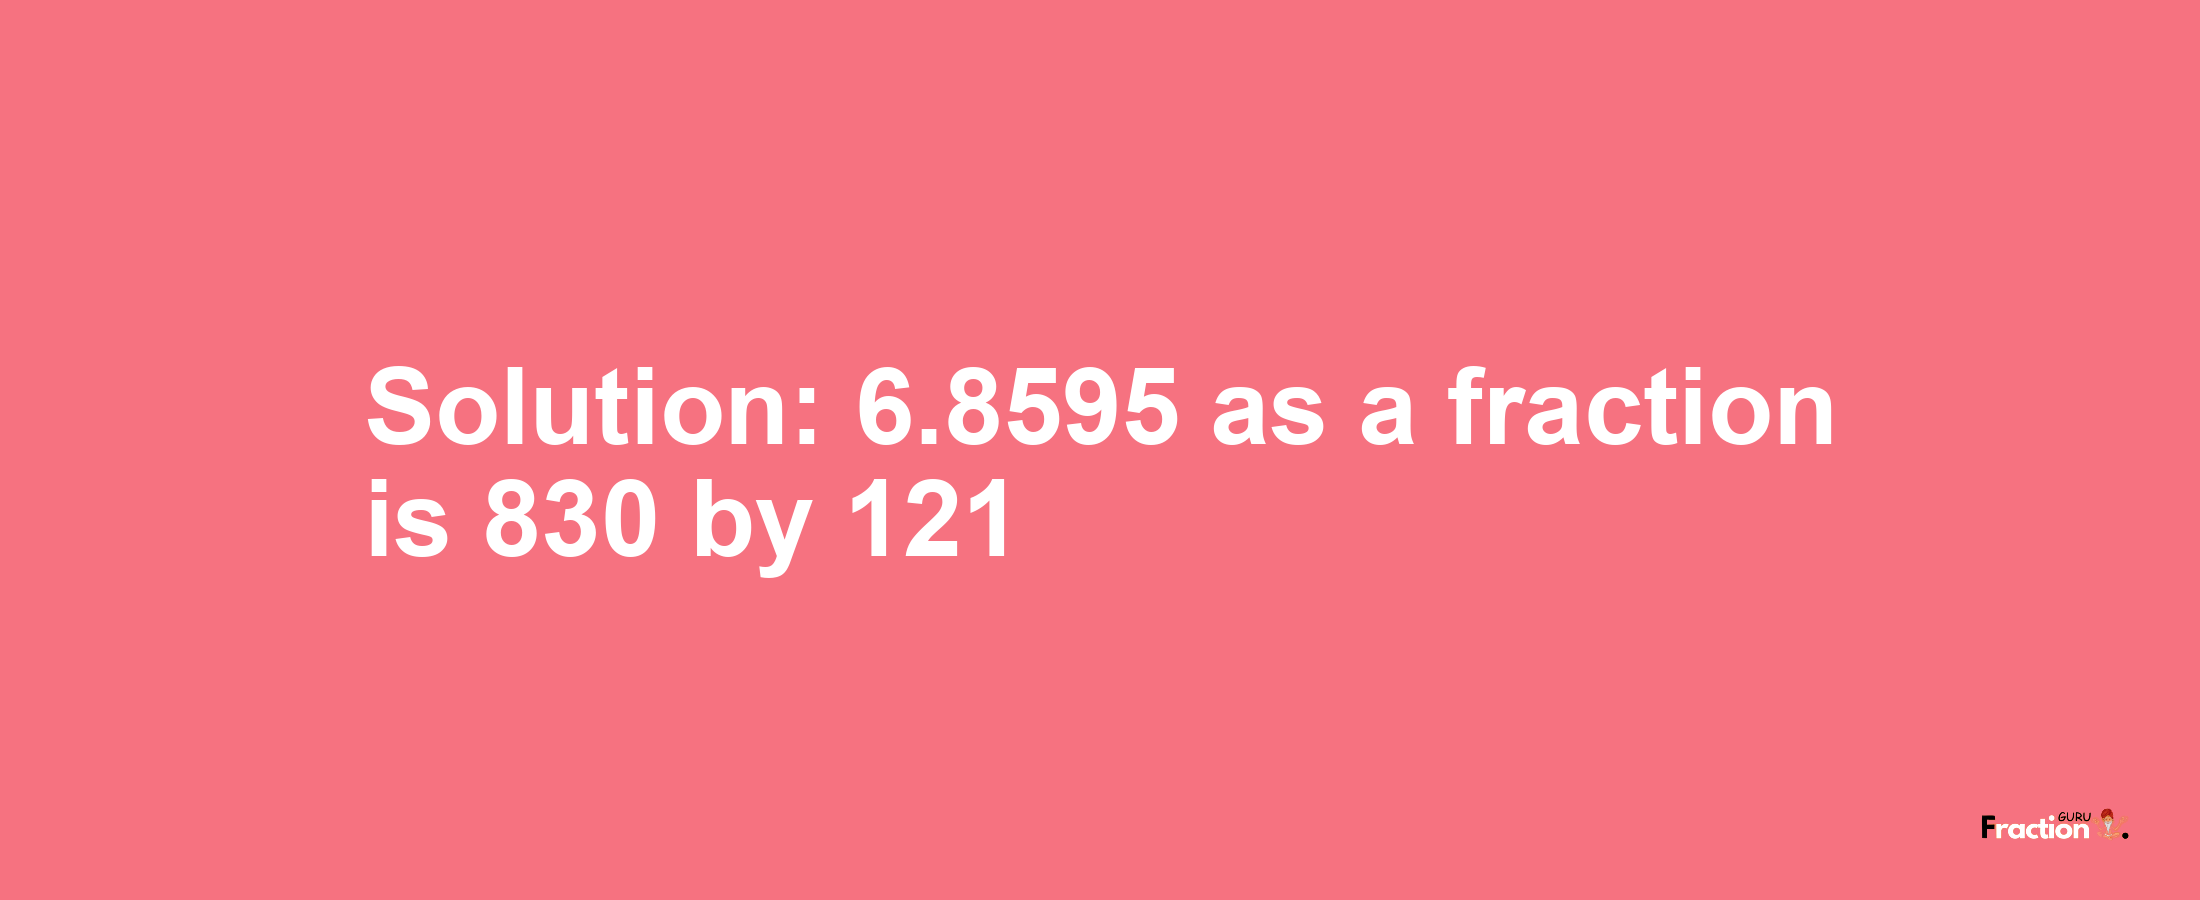 Solution:6.8595 as a fraction is 830/121